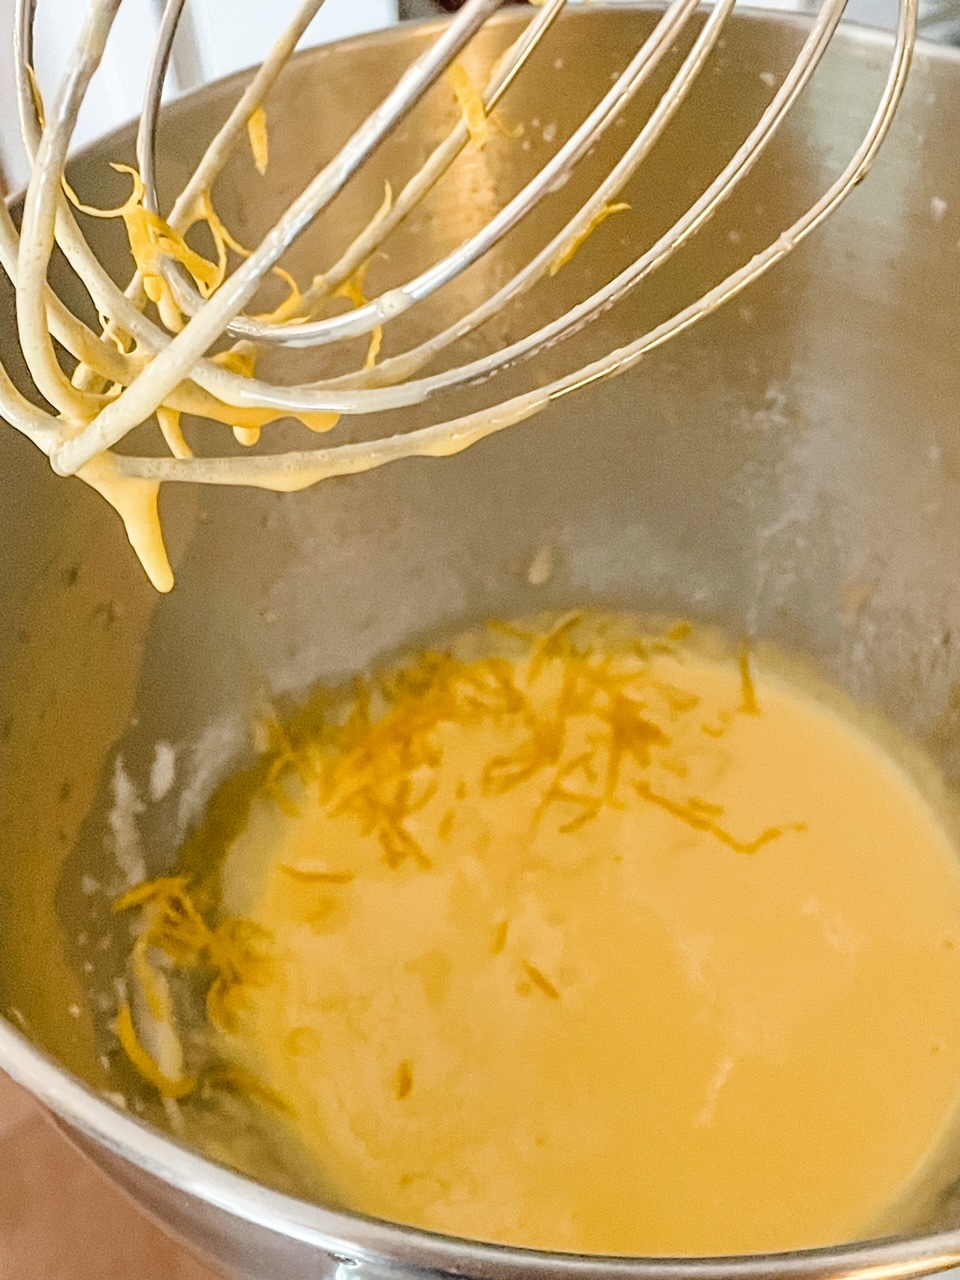 A whisk attachment with some of the batter dripping off